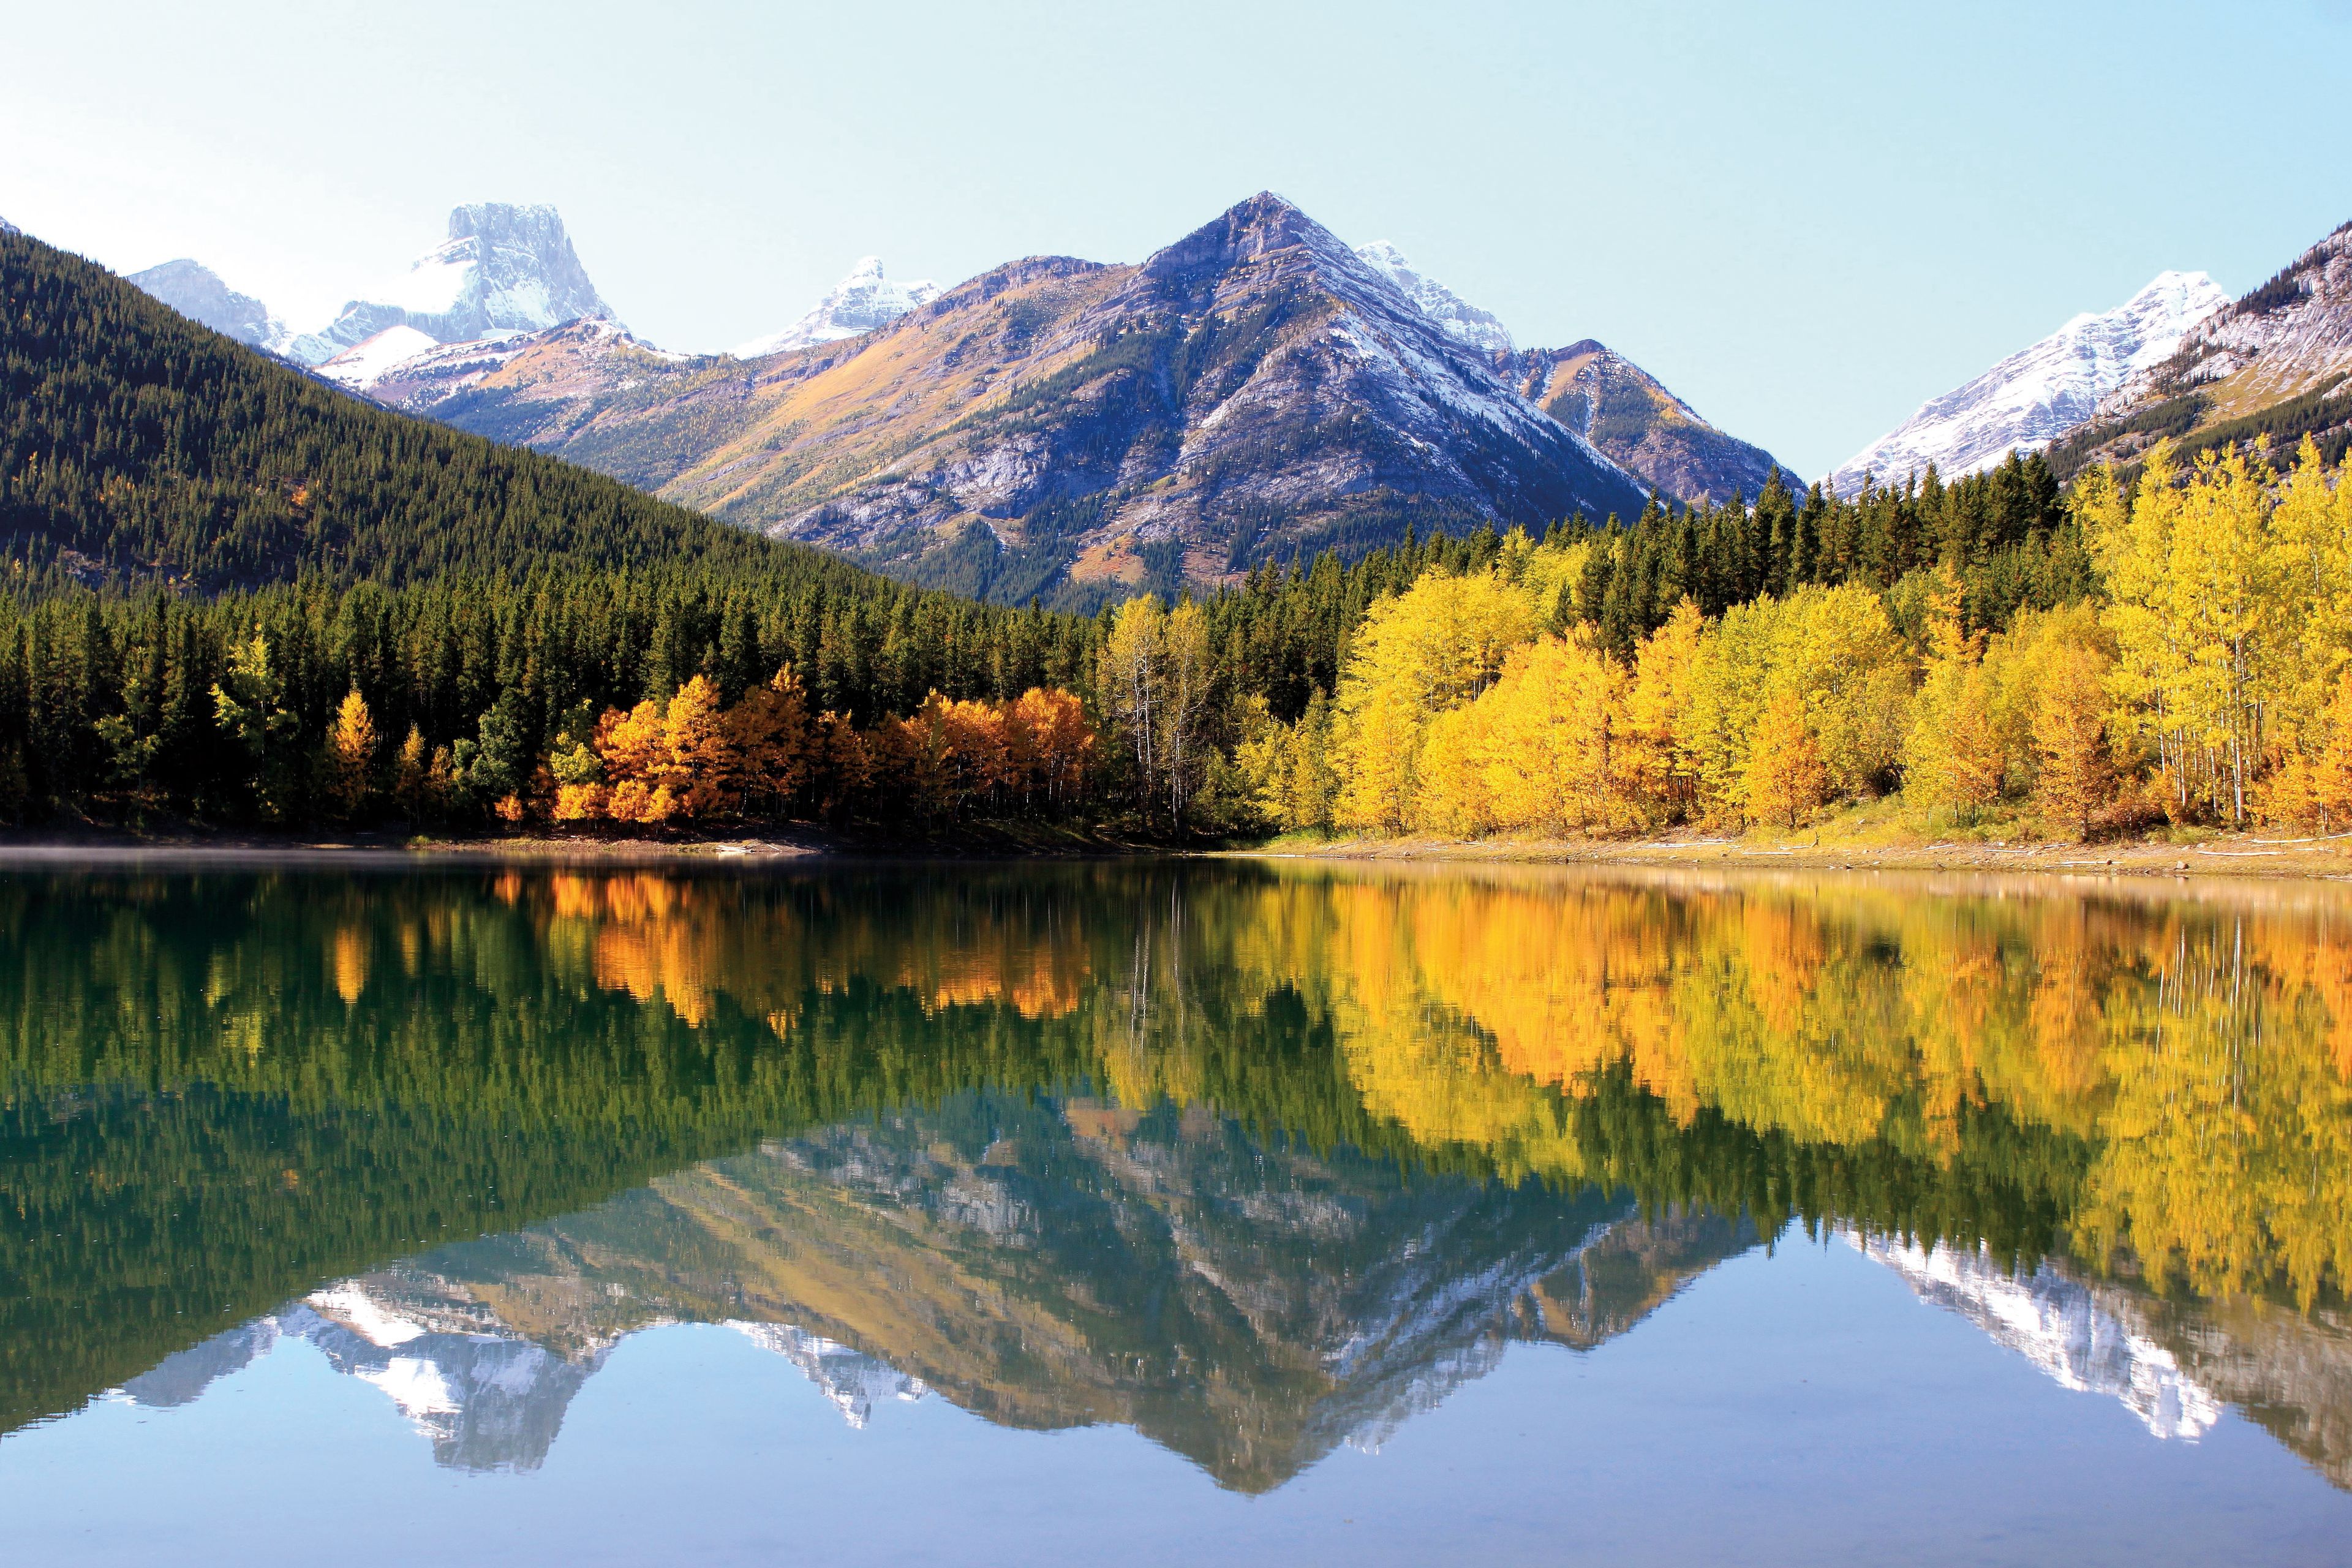 Mountains, evergreens, and quaking aspens with leaves changing colors are reflected in a lake at Banff National Park in Alberta, Canada.